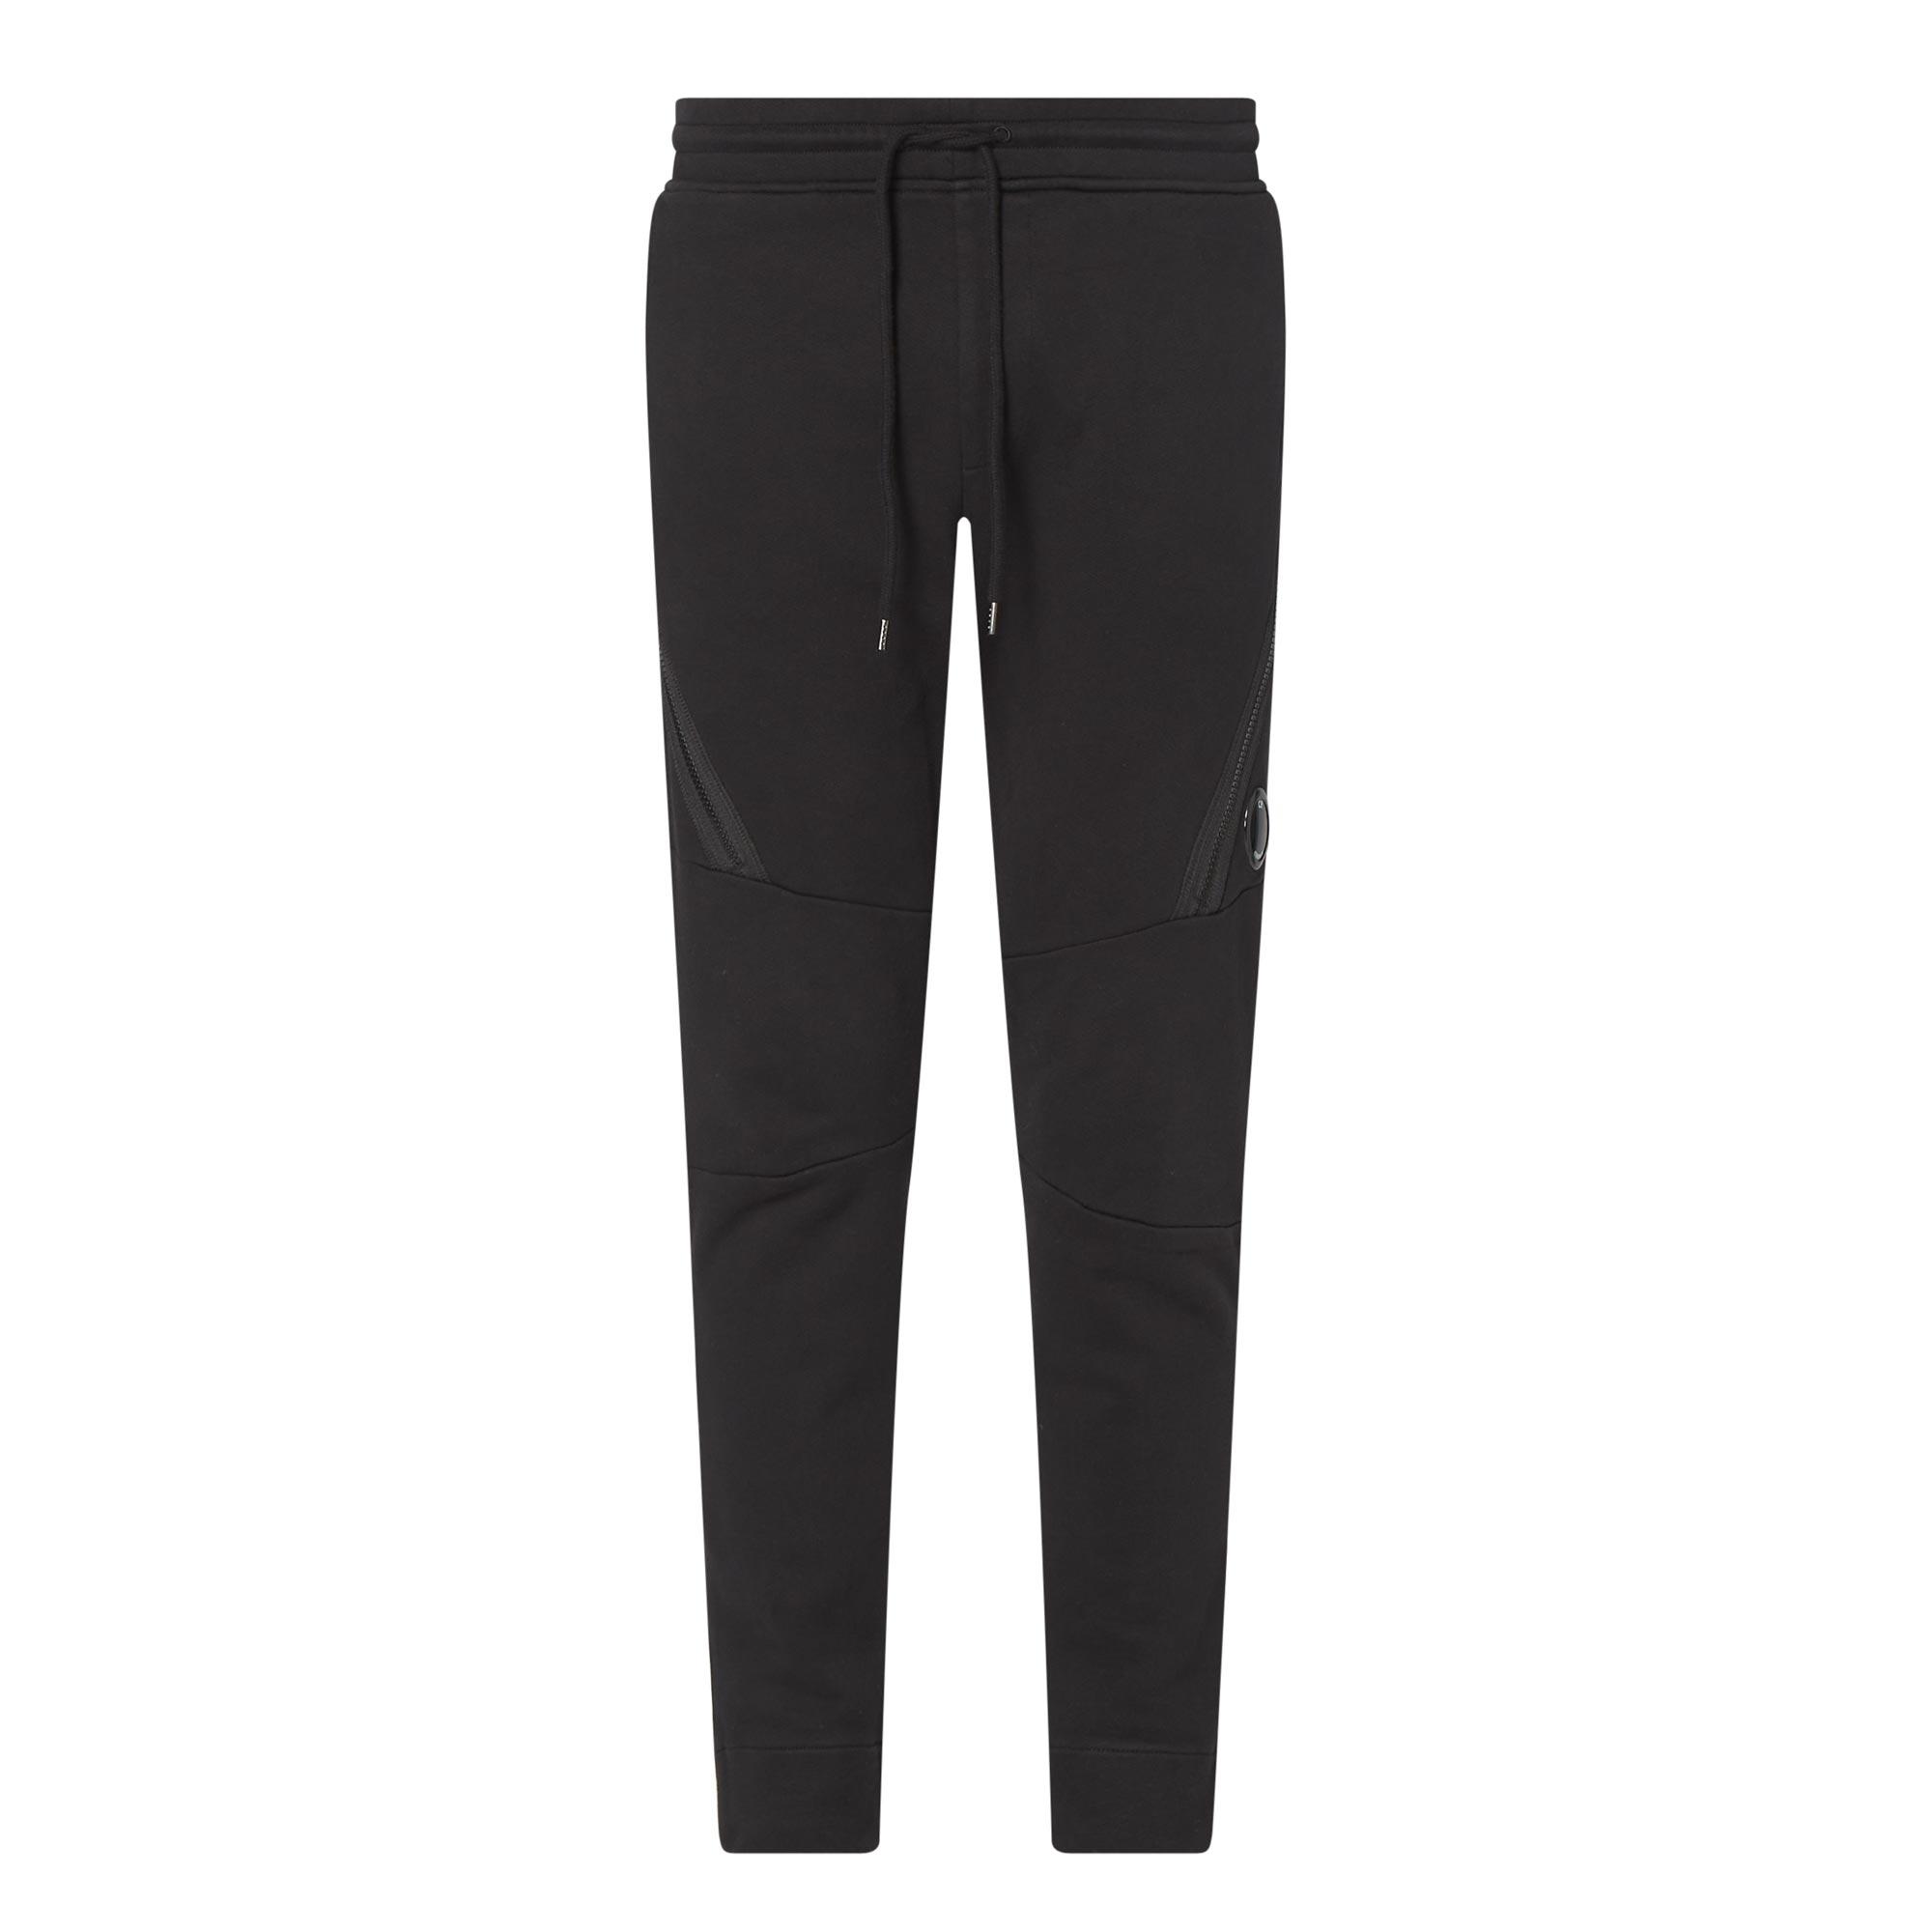 Lens Tapered Fit Sweatpants